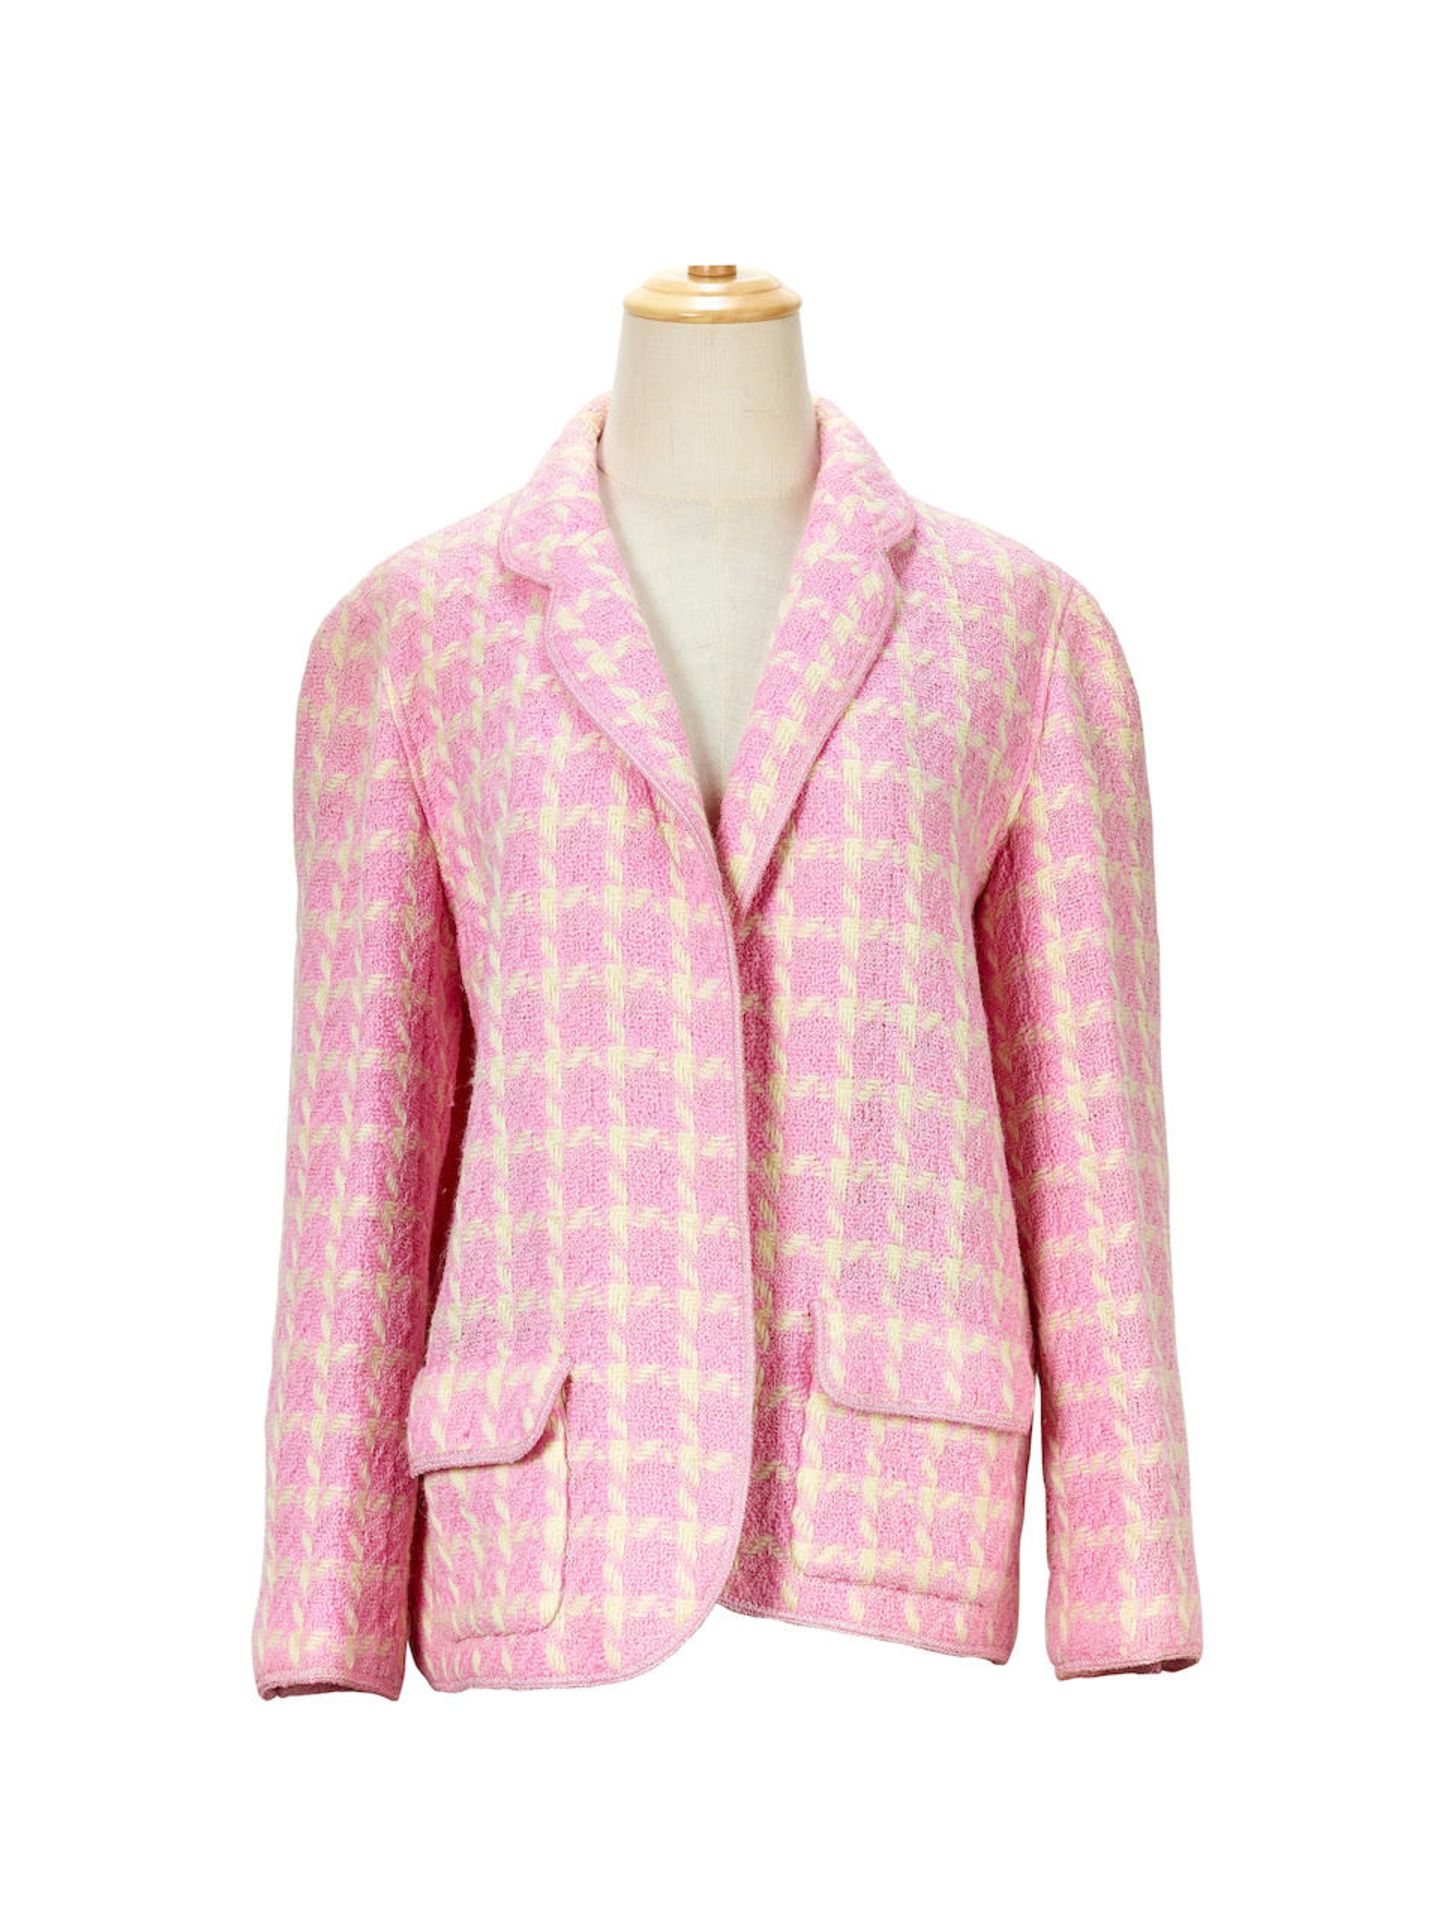 CHANEL: PINK AND WHITE HOUNDSTOOTH PATTTERN JACKET (Includes replacement button, thread swatch f...